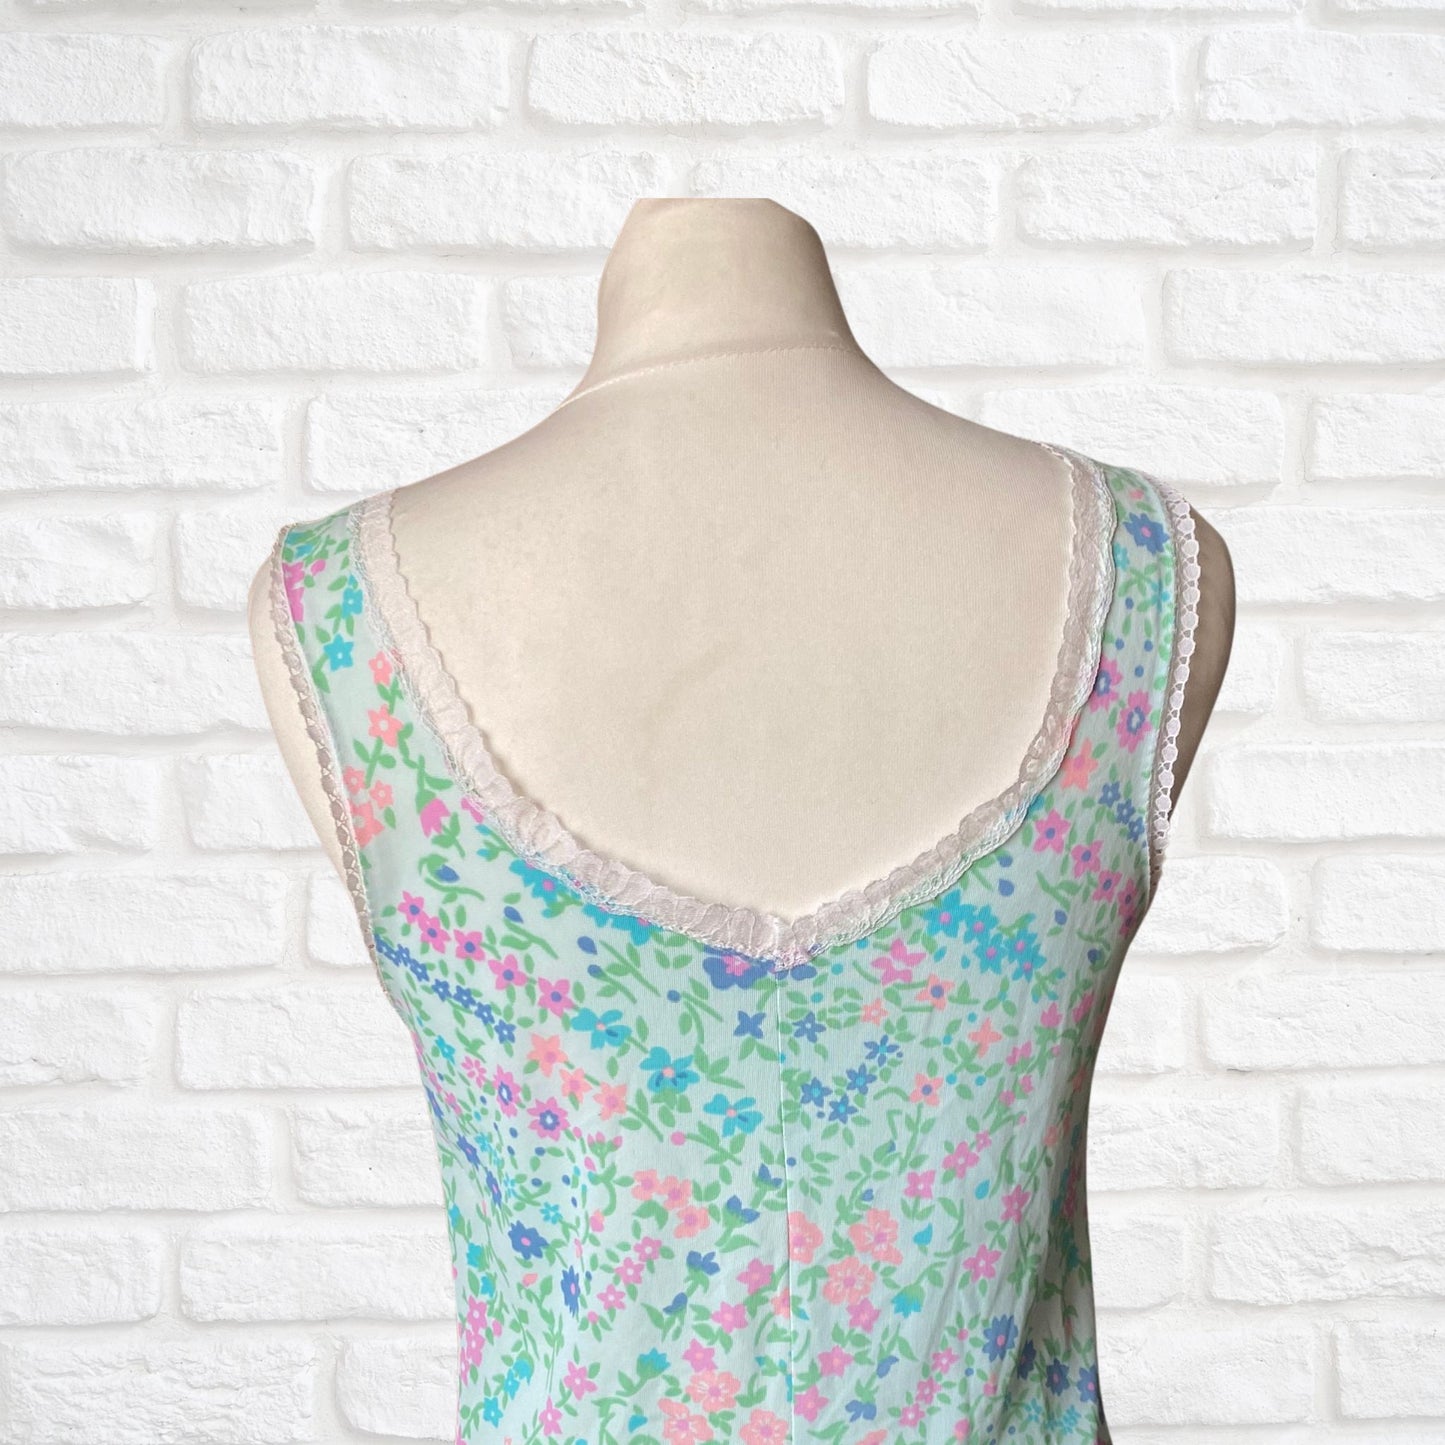 Vintage short length bright floral, lace trimmed slip dress/ petticoat. Great gift idea. Approx UK size 8-10